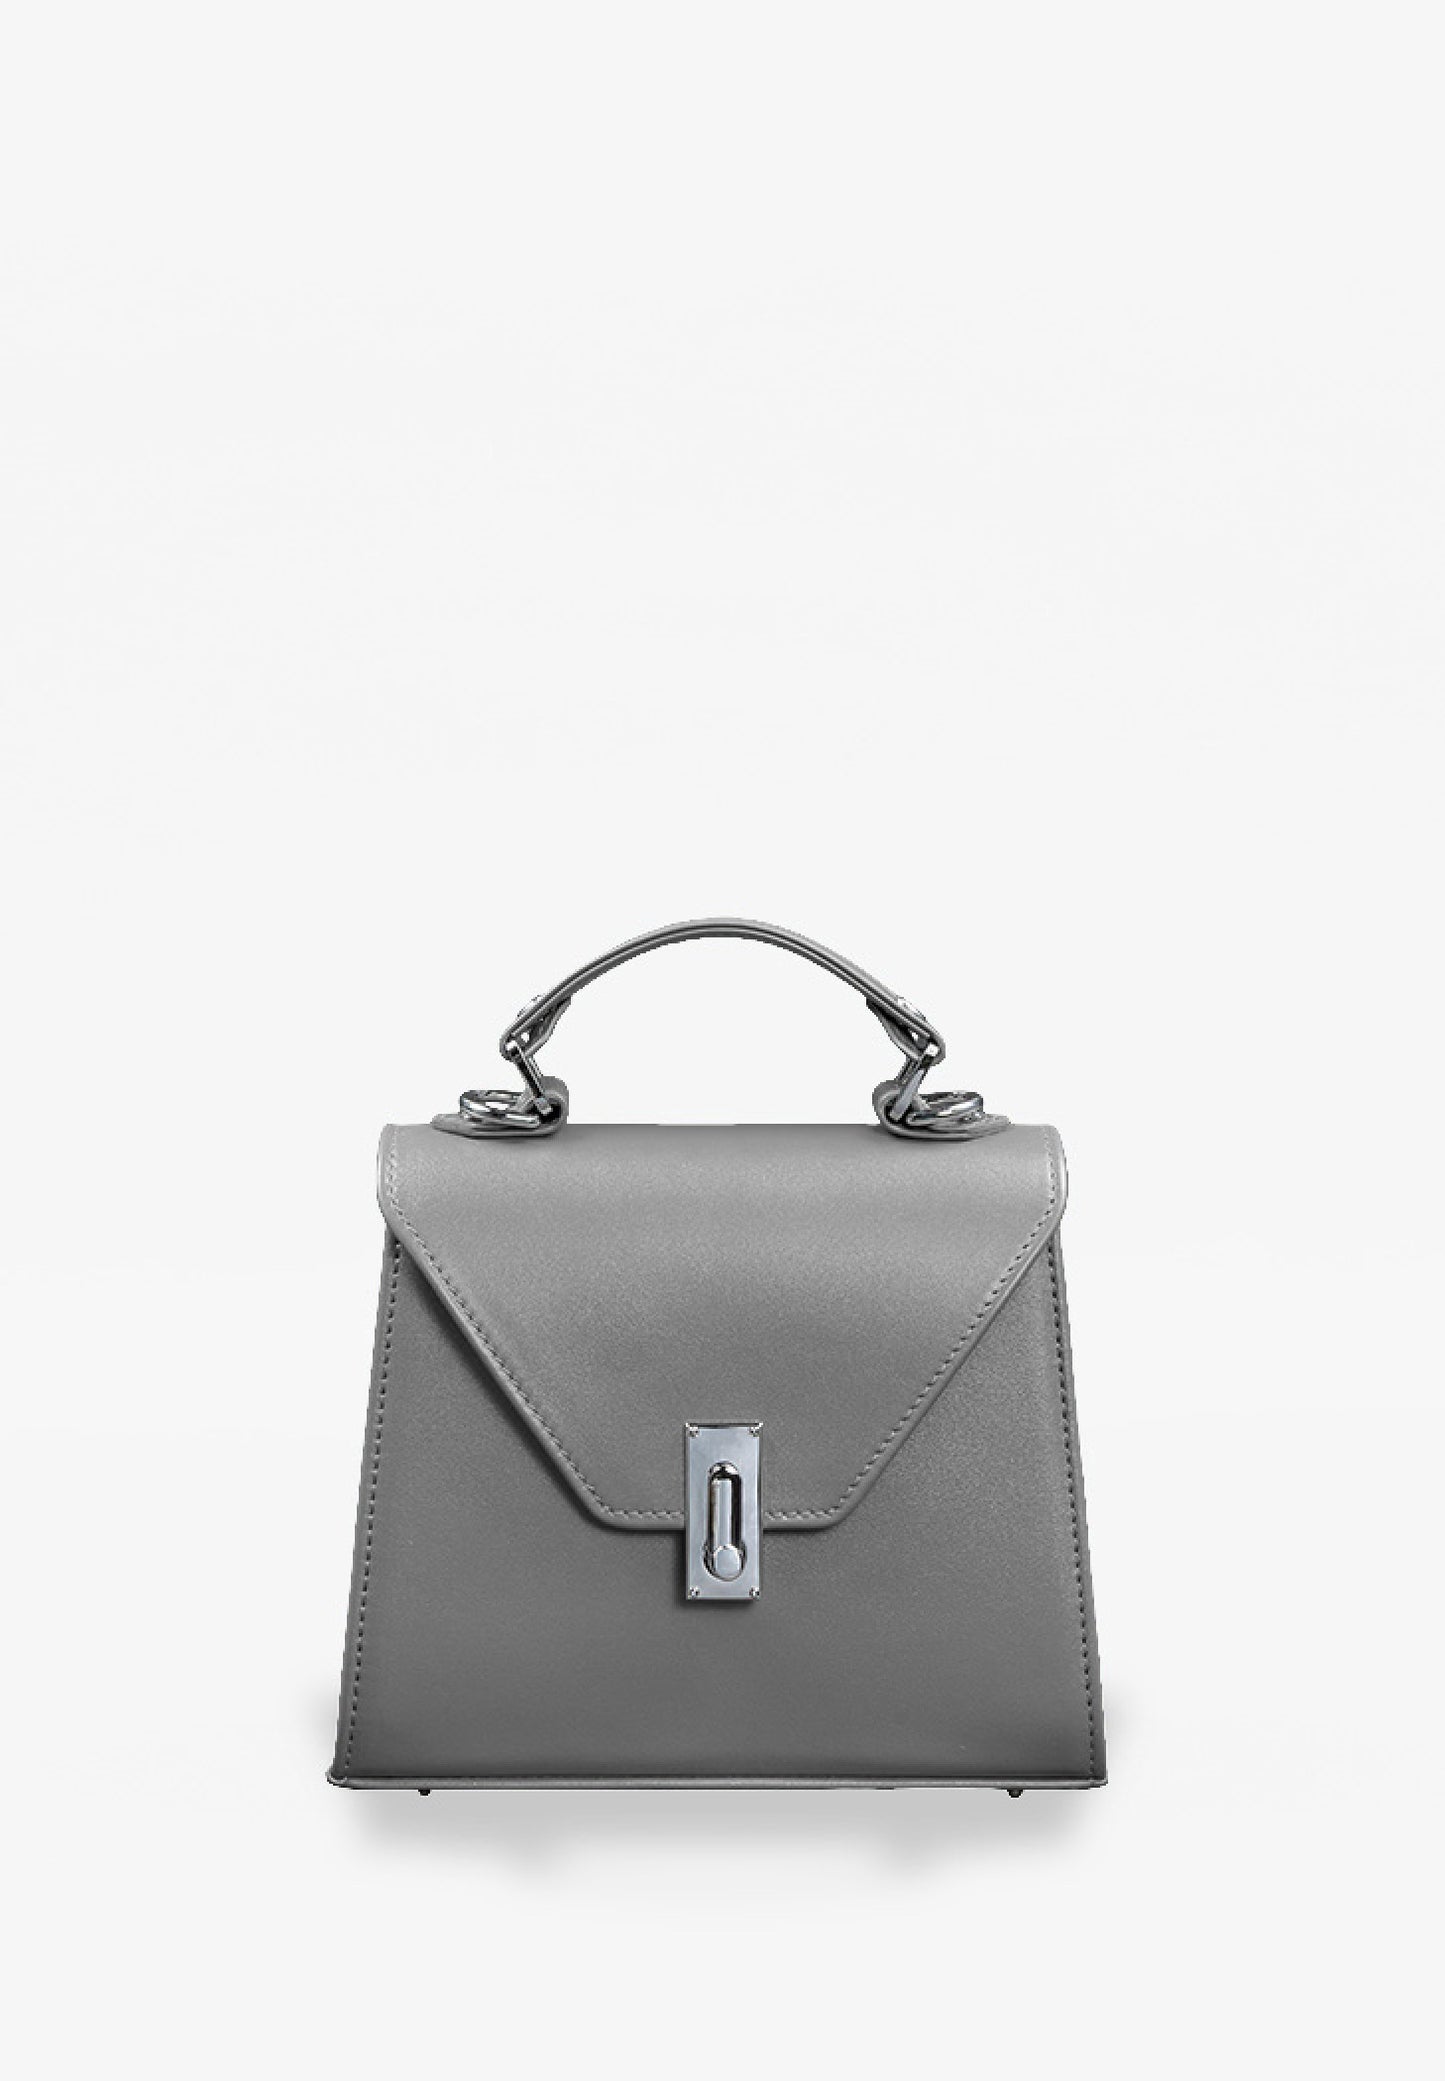 leather bag for women in grey color on a white background